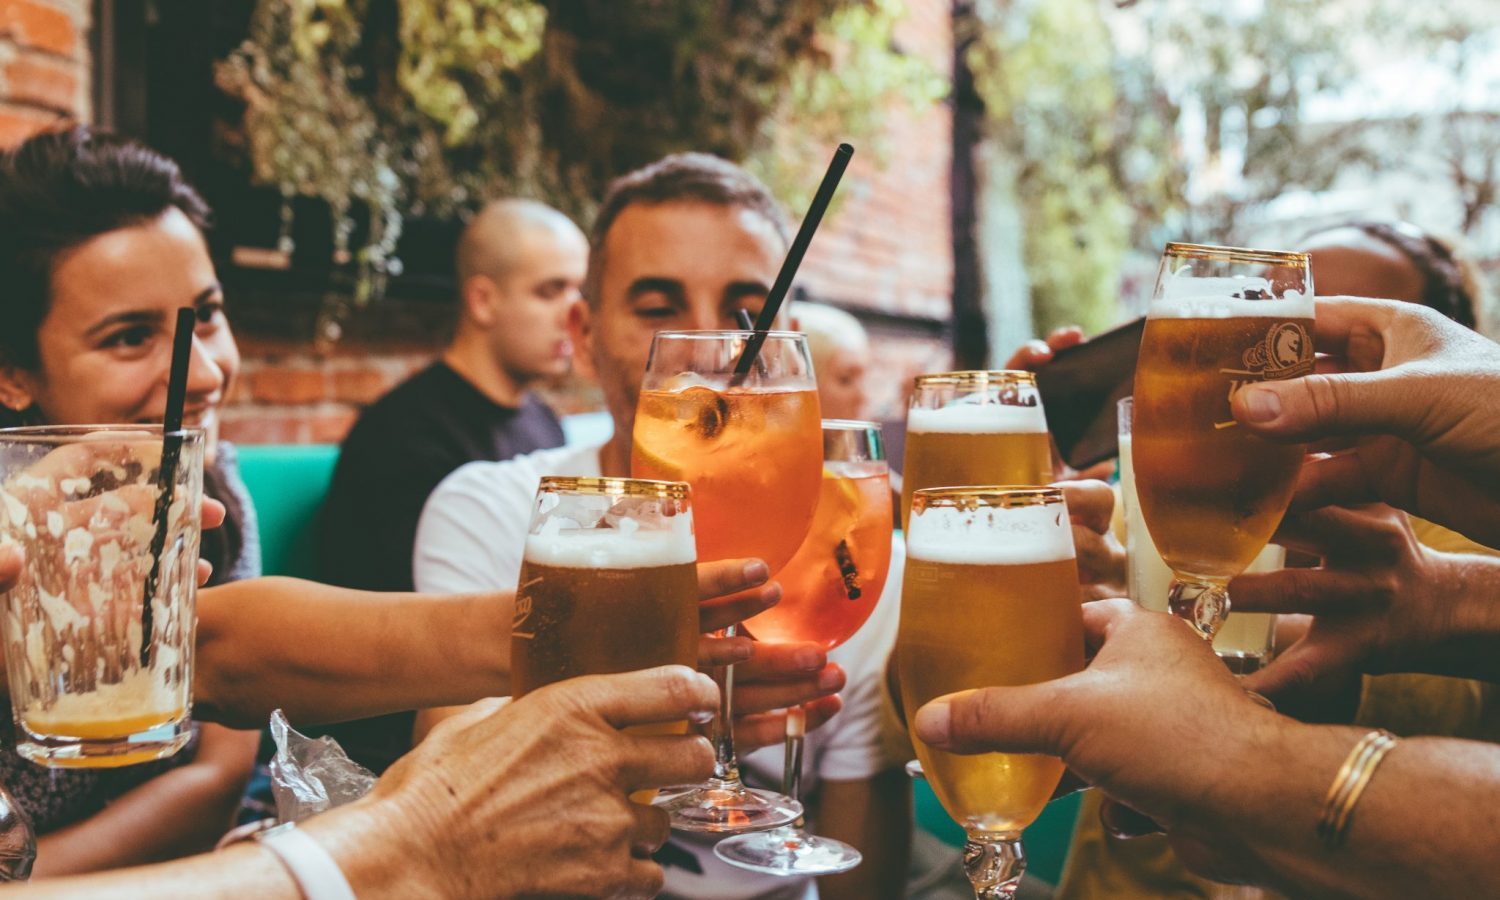 Has The Pandemic Changed Your Drinking Habits? Here’s How To Know